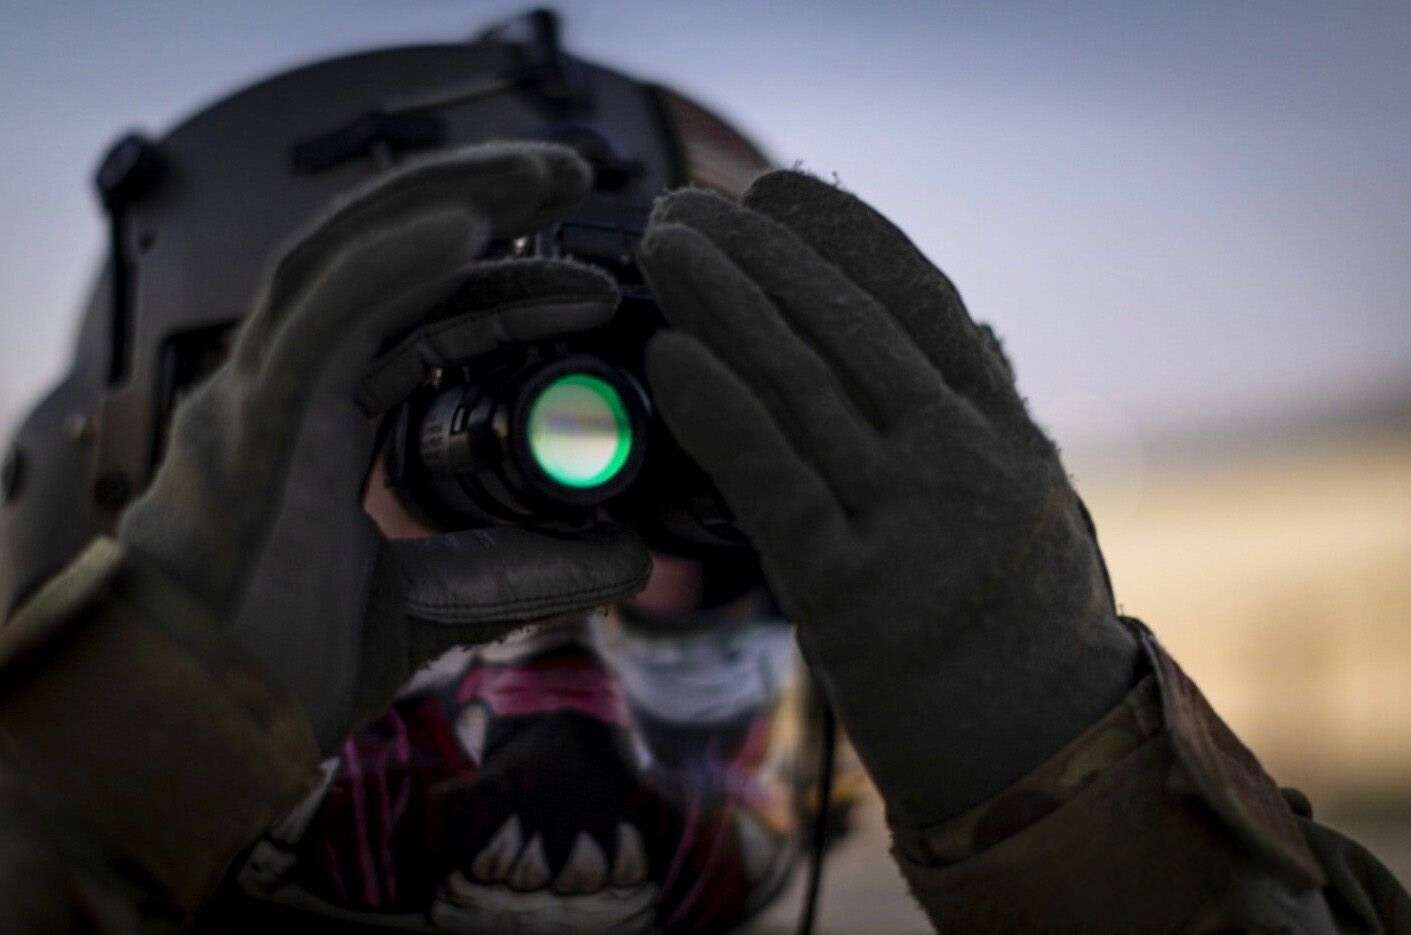 In the U.S., night vision scopes legality is clear: ownership and use require no special license or permit. However, exporting night vision devices without proper authorization constitutes a violation due to potential military applications.